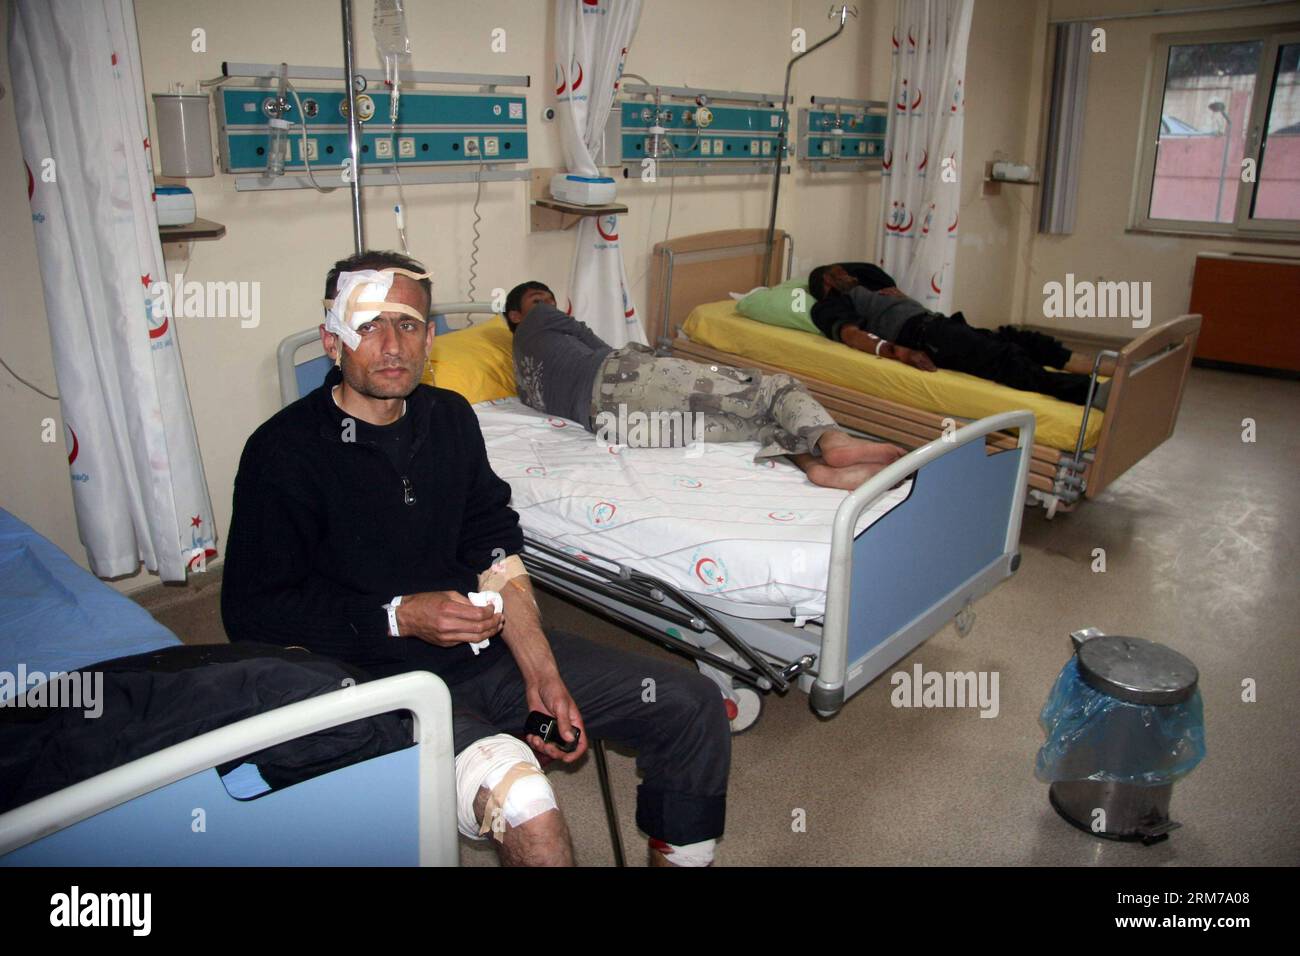 (140220) -- KILIS(TURKEY), Feb. 20, 2014 (Xinhua) -- Wounded people are seen at a hospital in southern Turkish province of Kilis, Feb. 20, 2014. At least 24 people were killed and many others wounded on Thursday in a strong explosion near Syrian- Turkish border in Kilis province in southern Turkey, private Dogan news agency reported. (Xinhua/Mert Macit) TURKEY-KILIS-SYRIAN BORDER-BLAST PUBLICATIONxNOTxINxCHN   Turkey Feb 20 2014 XINHUA Wounded Celebrities are Lakes AT a Hospital in Southern Turkish Province of  Feb 20 2014 AT least 24 Celebrities Were KILLED and MANY Others Wounded ON Thursday Stock Photo